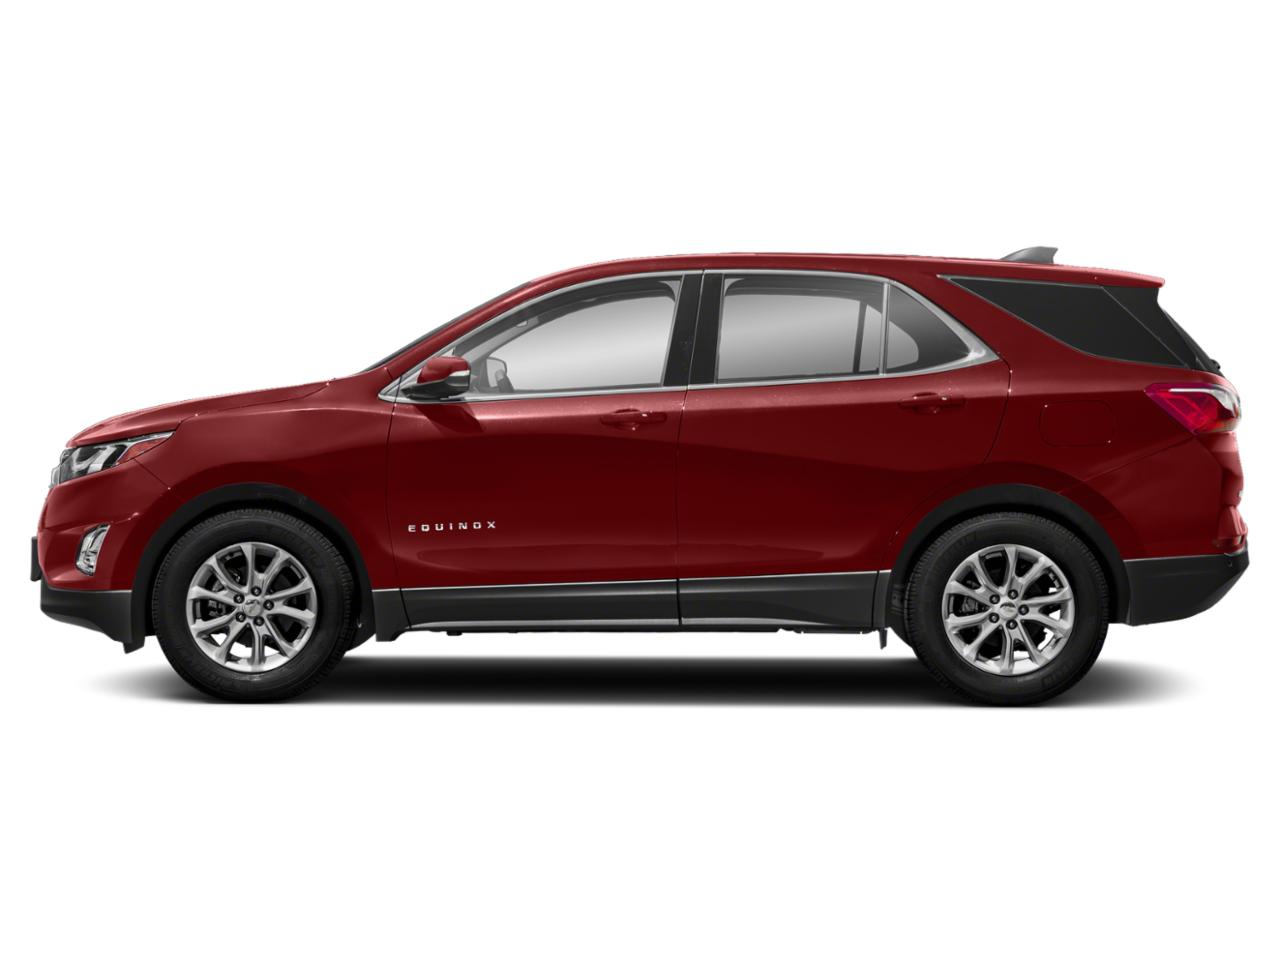 Used 2018 Chevrolet Equinox LT with VIN 2GNAXTEX2J6169556 for sale in Staples, Minnesota